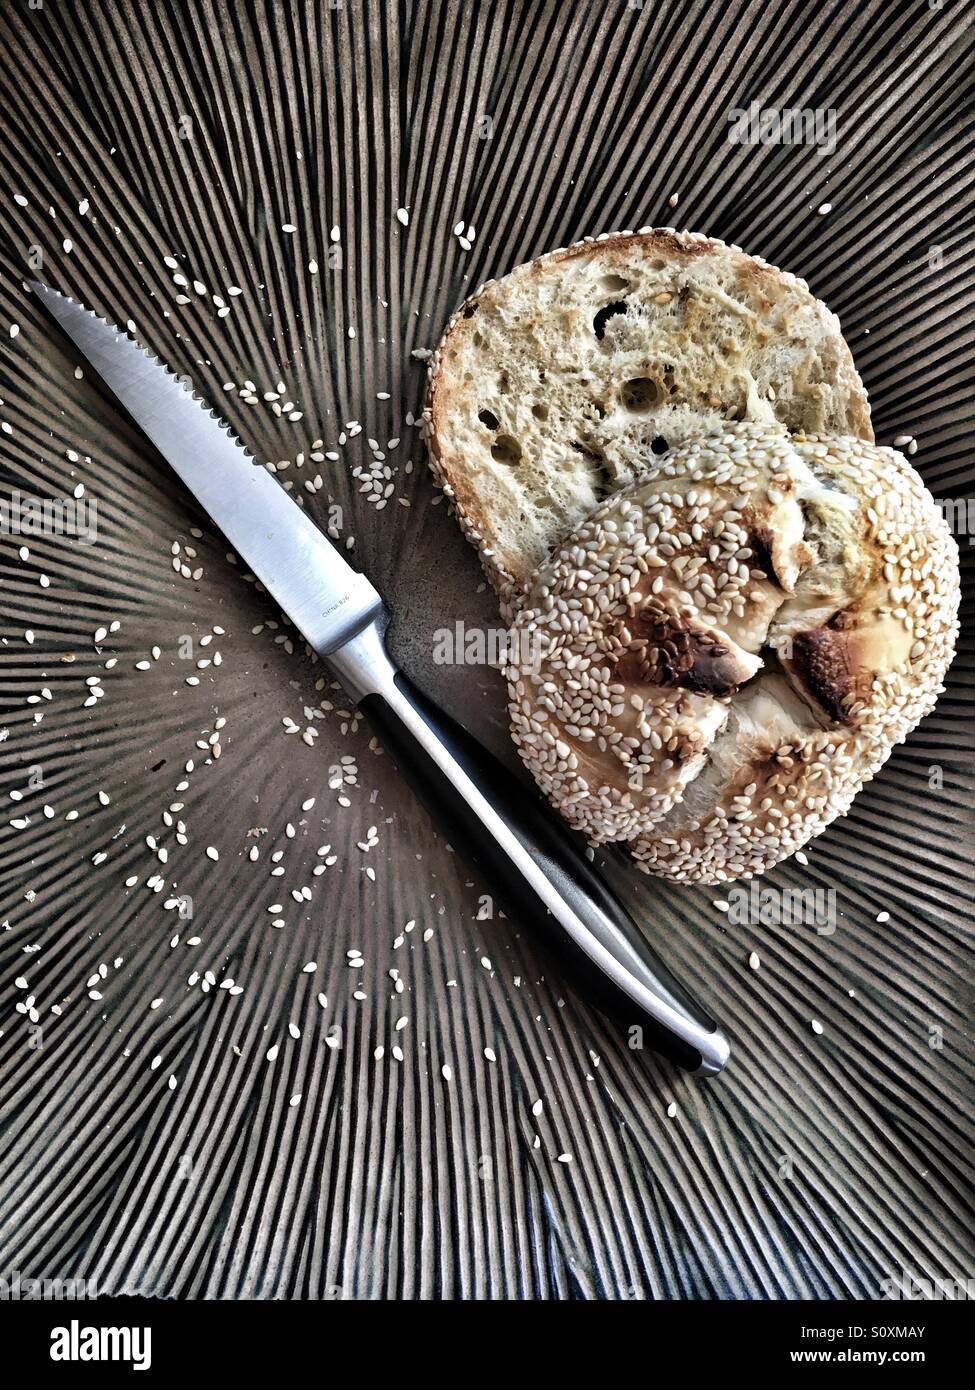 Seeded bagel on a plate Stock Photo